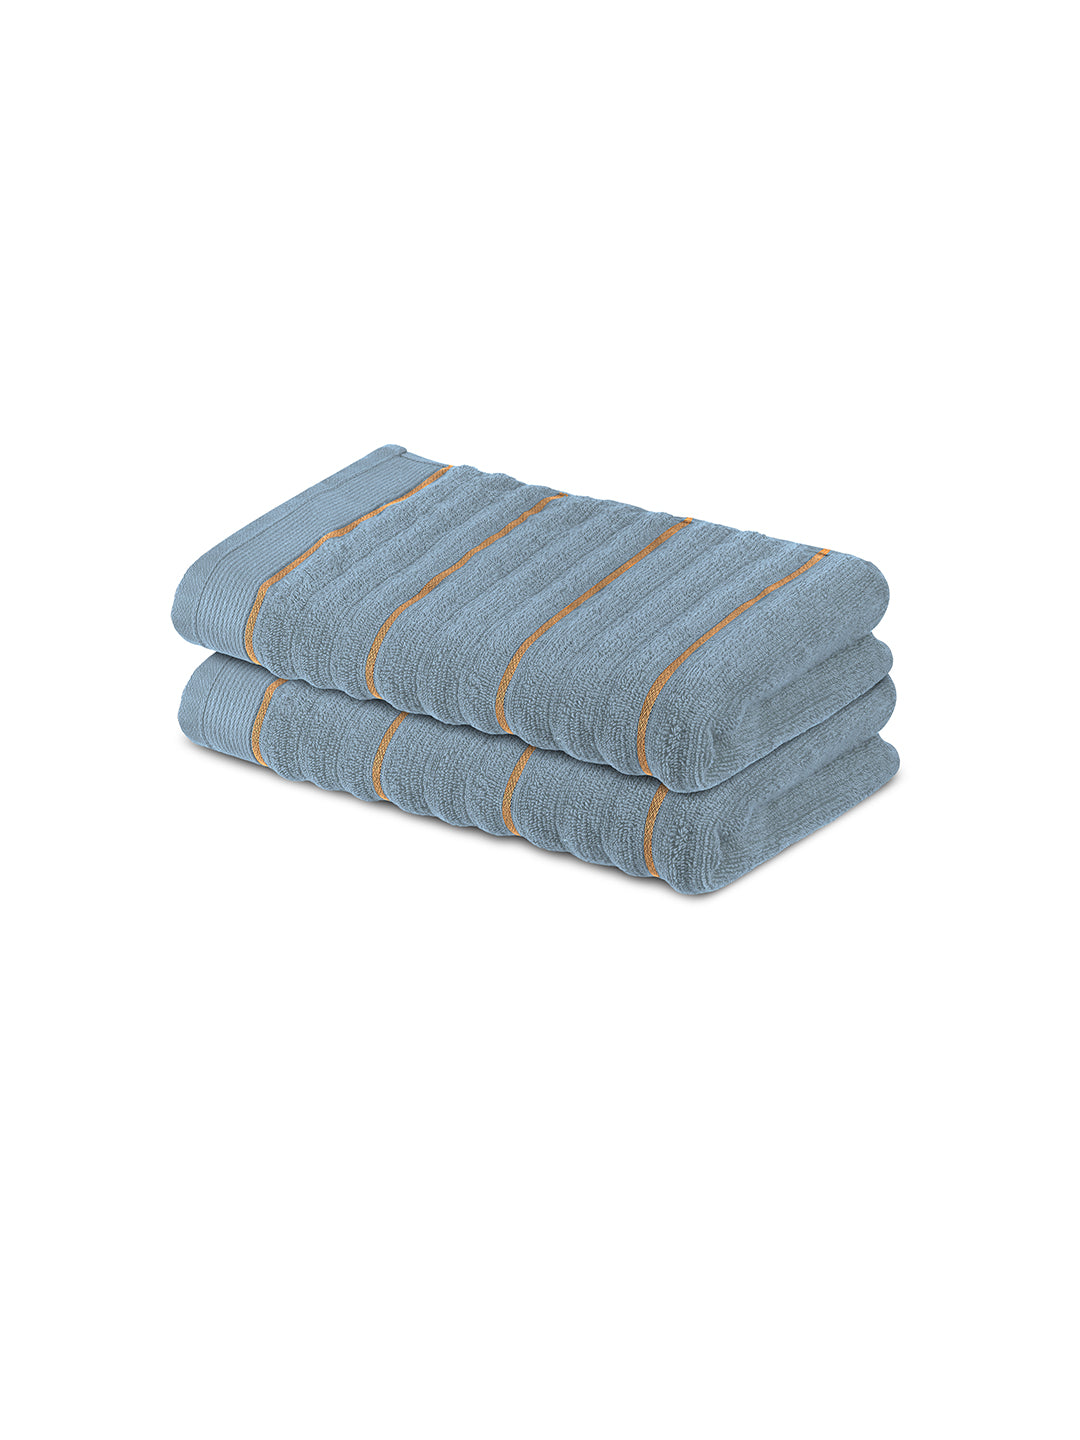 Elite Plush Quickdry Pack of 2 Hand Towels